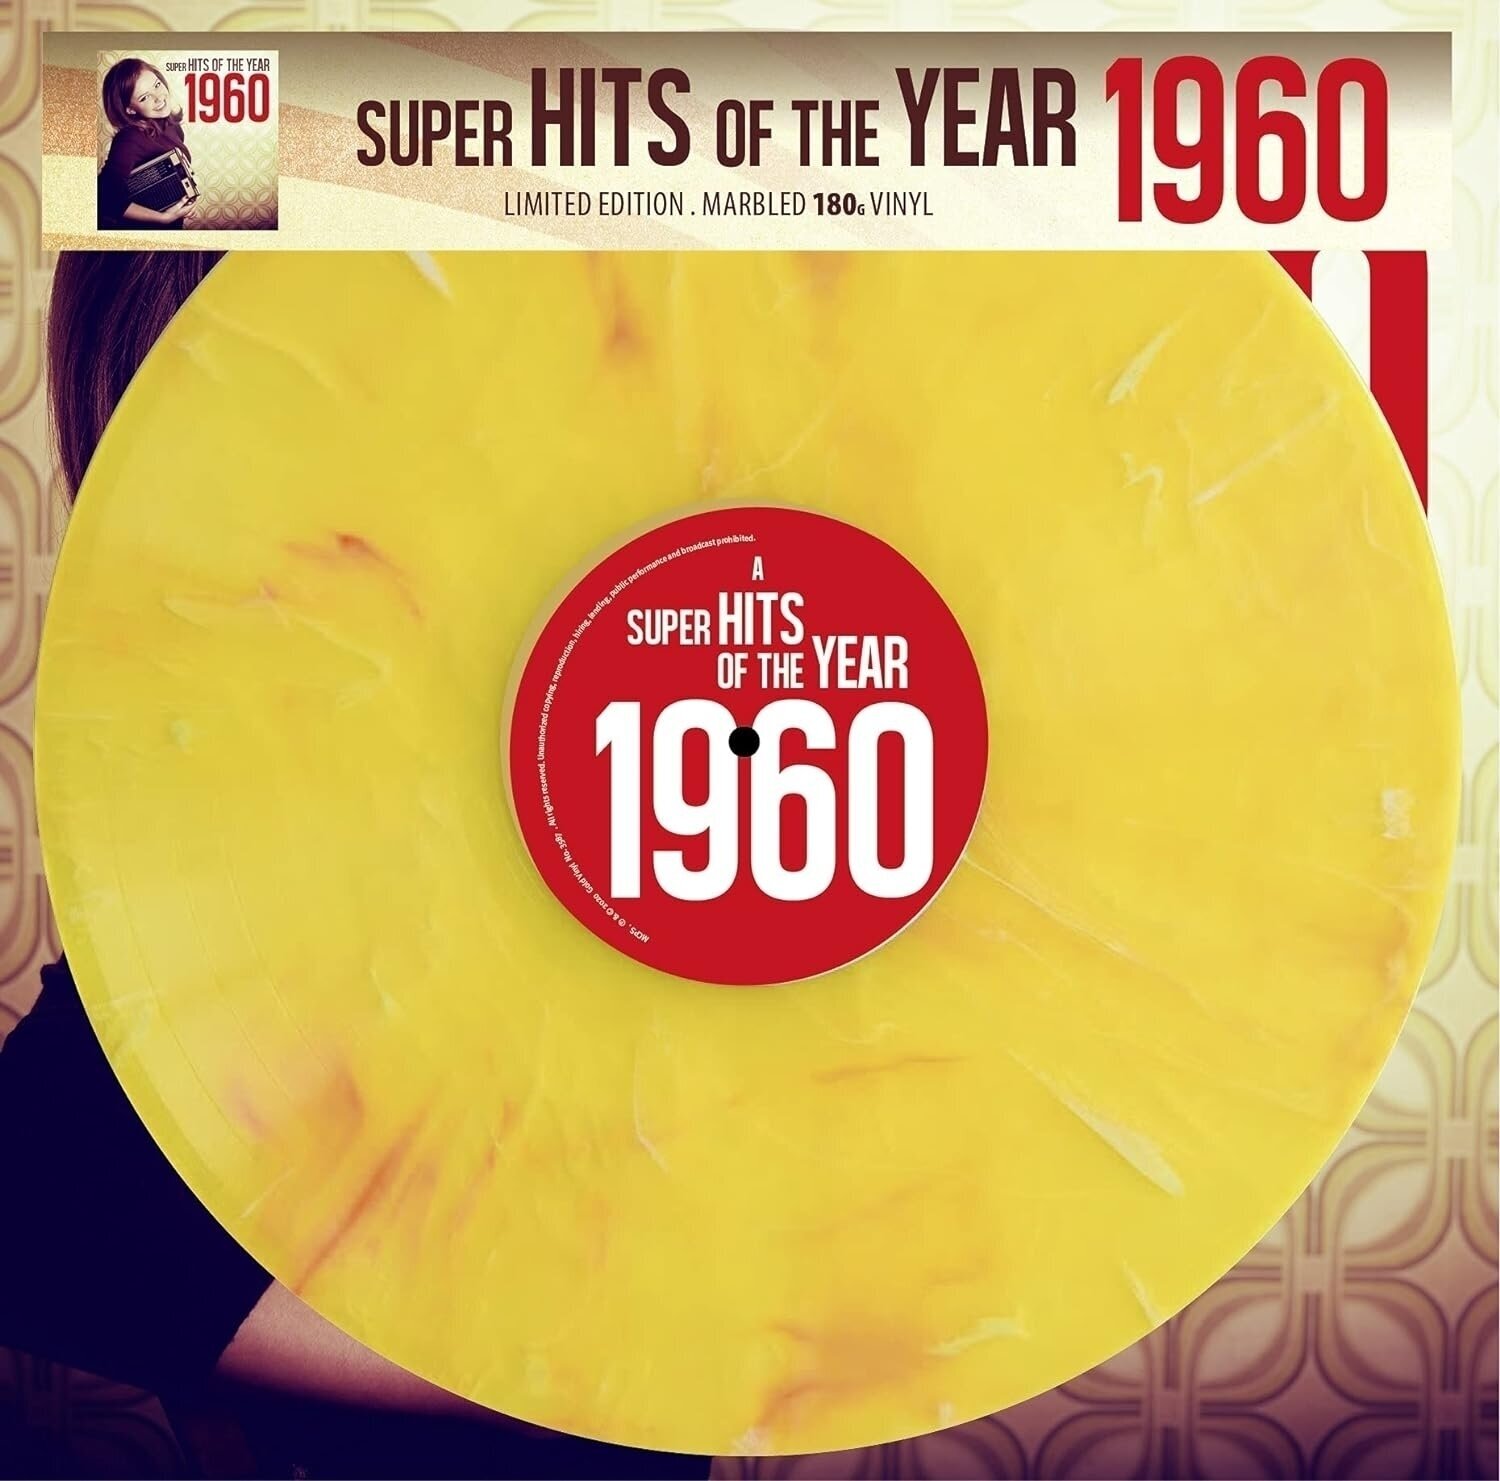 Vinyl Record Various Artists - Super Hits Of The Year 1960 (Limited Edition) (Numbered) (Yellow Marbled Coloured) (LP)